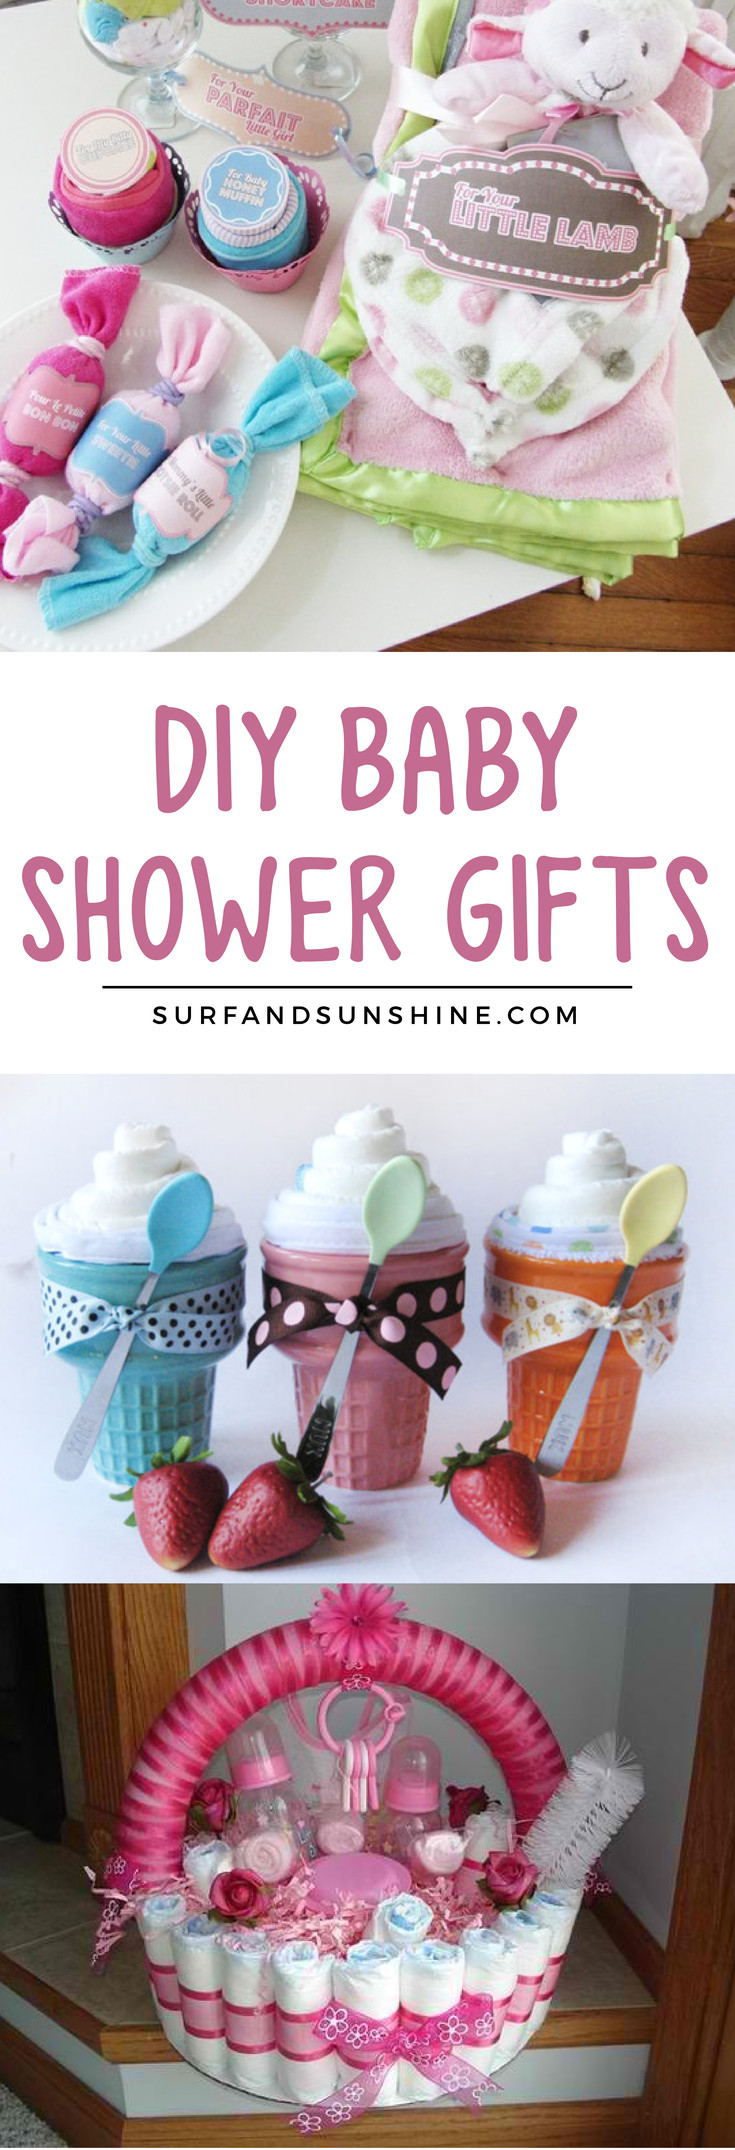 Cool DIY Gifts
 Unique DIY Baby Shower Gifts for Boys and Girls